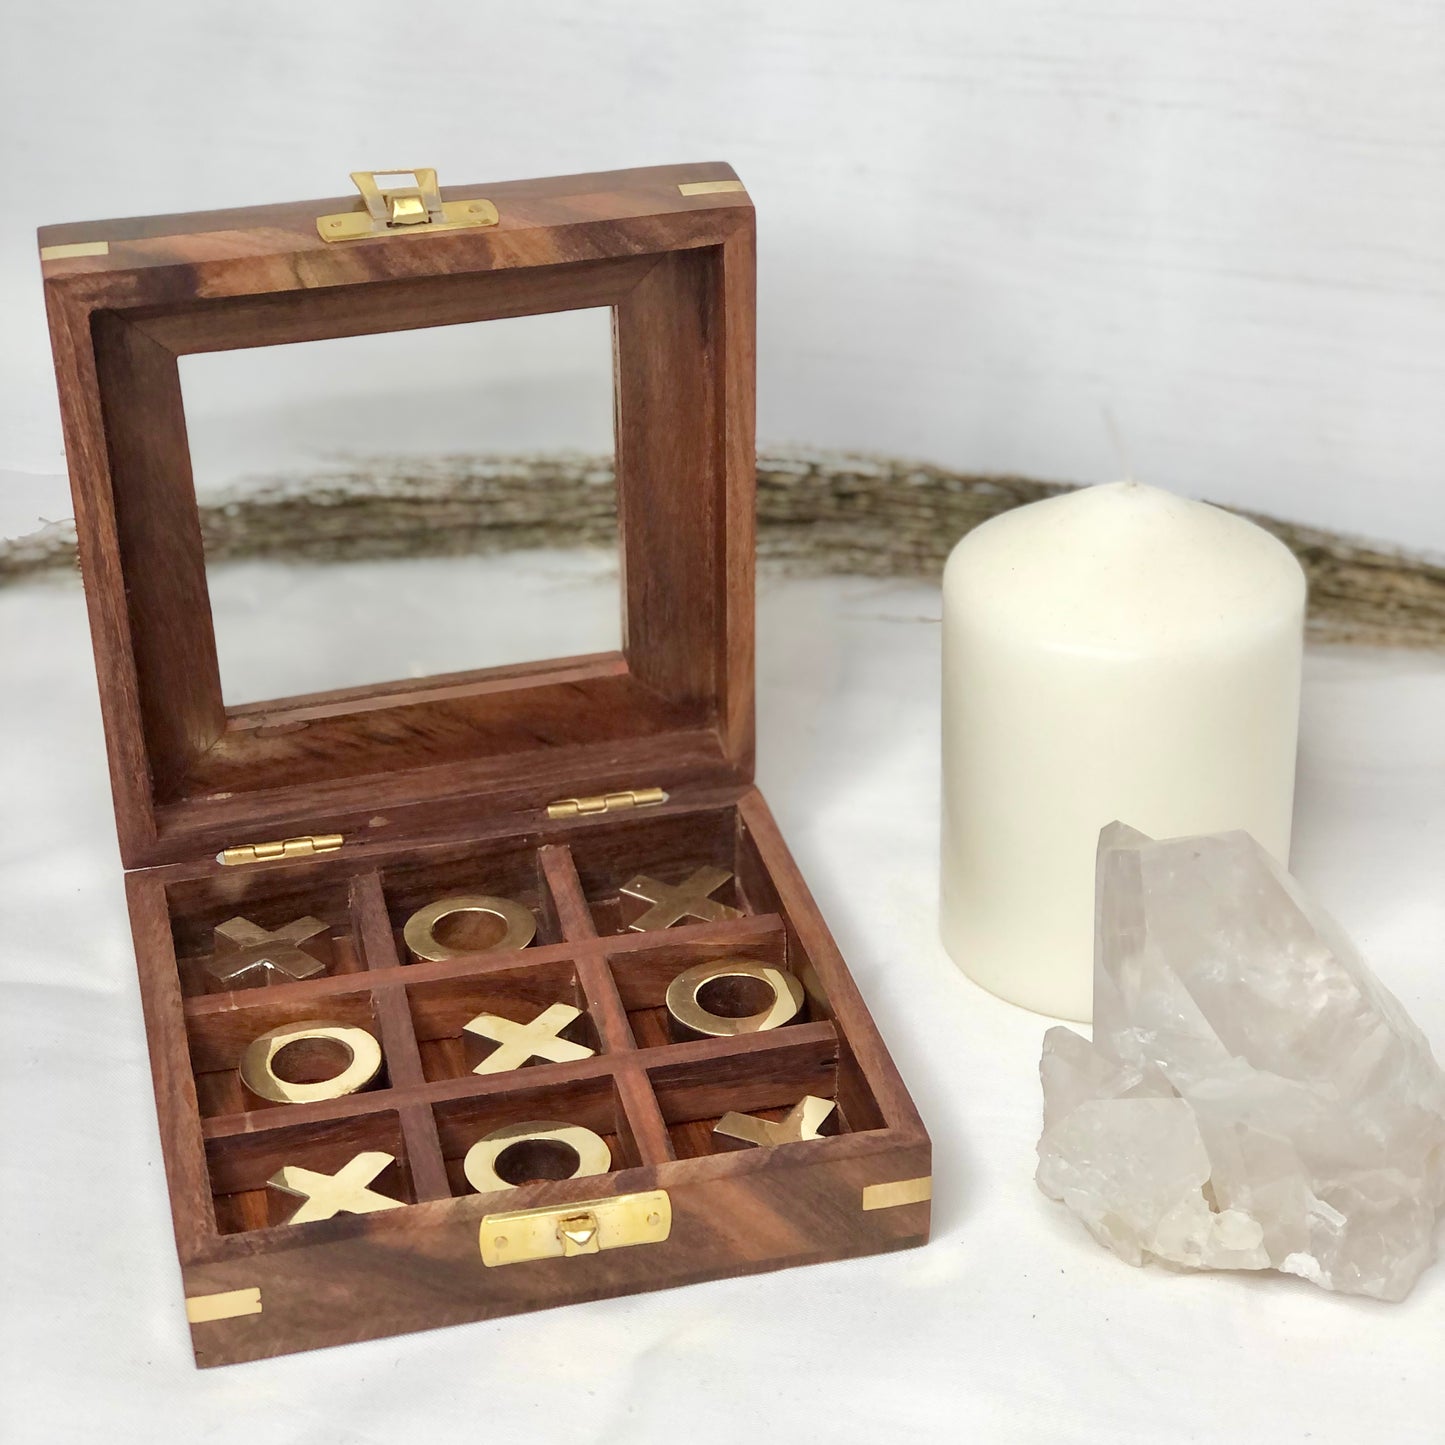 Hand crafted wood, glass + brass game box